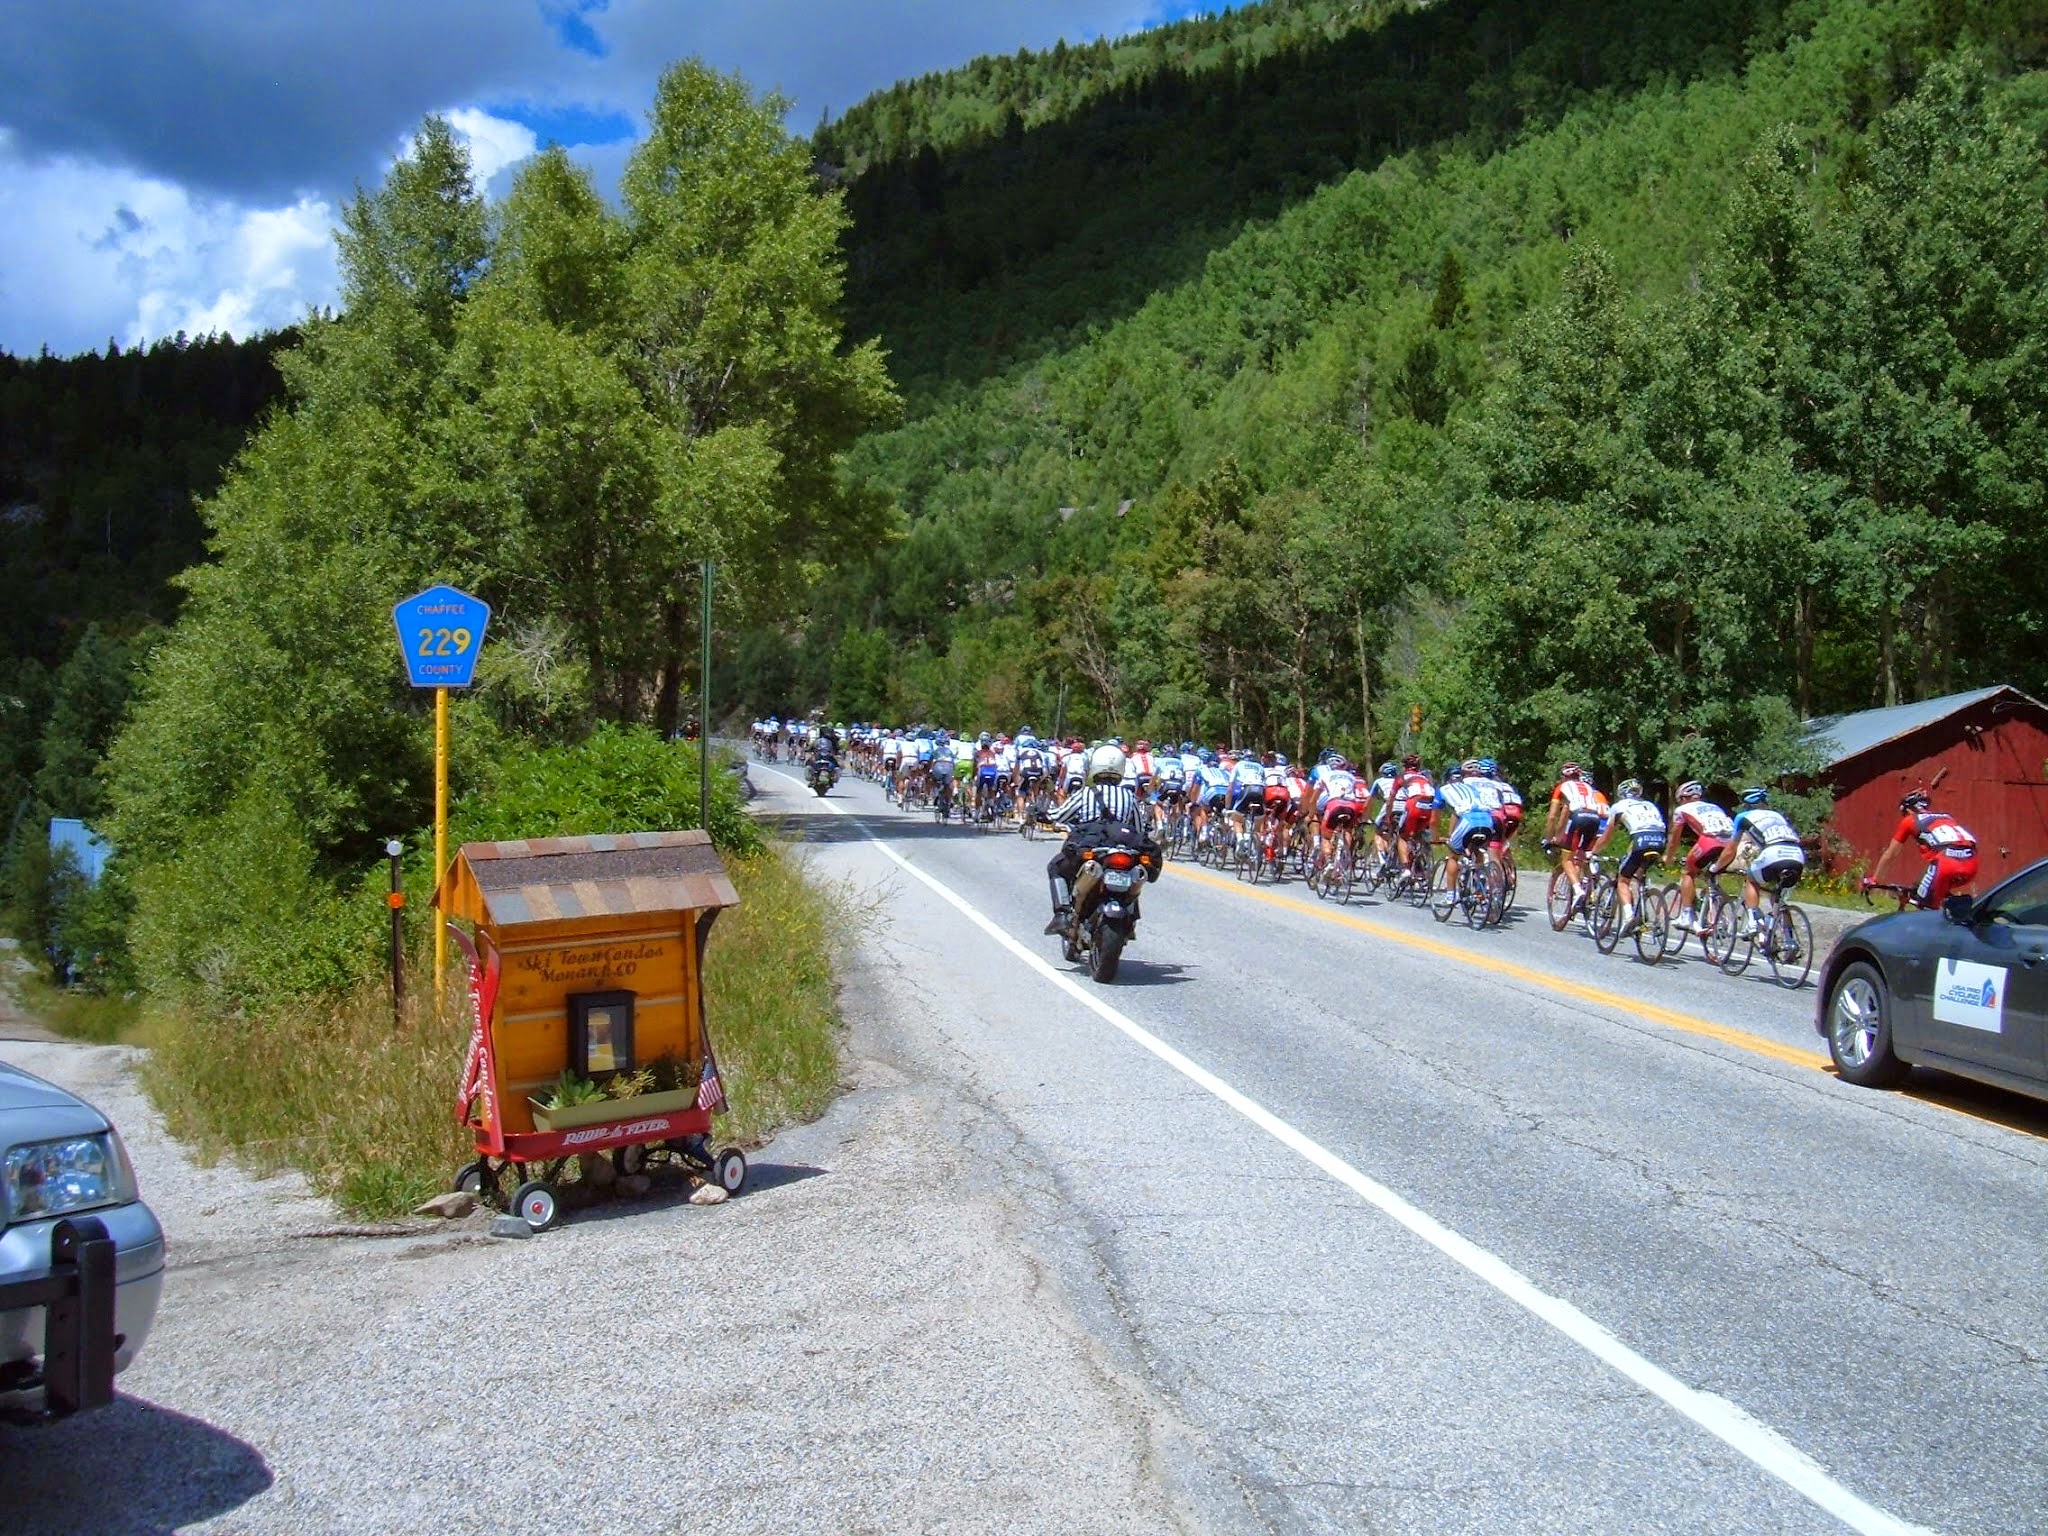 Cyclists on a mountain pass.